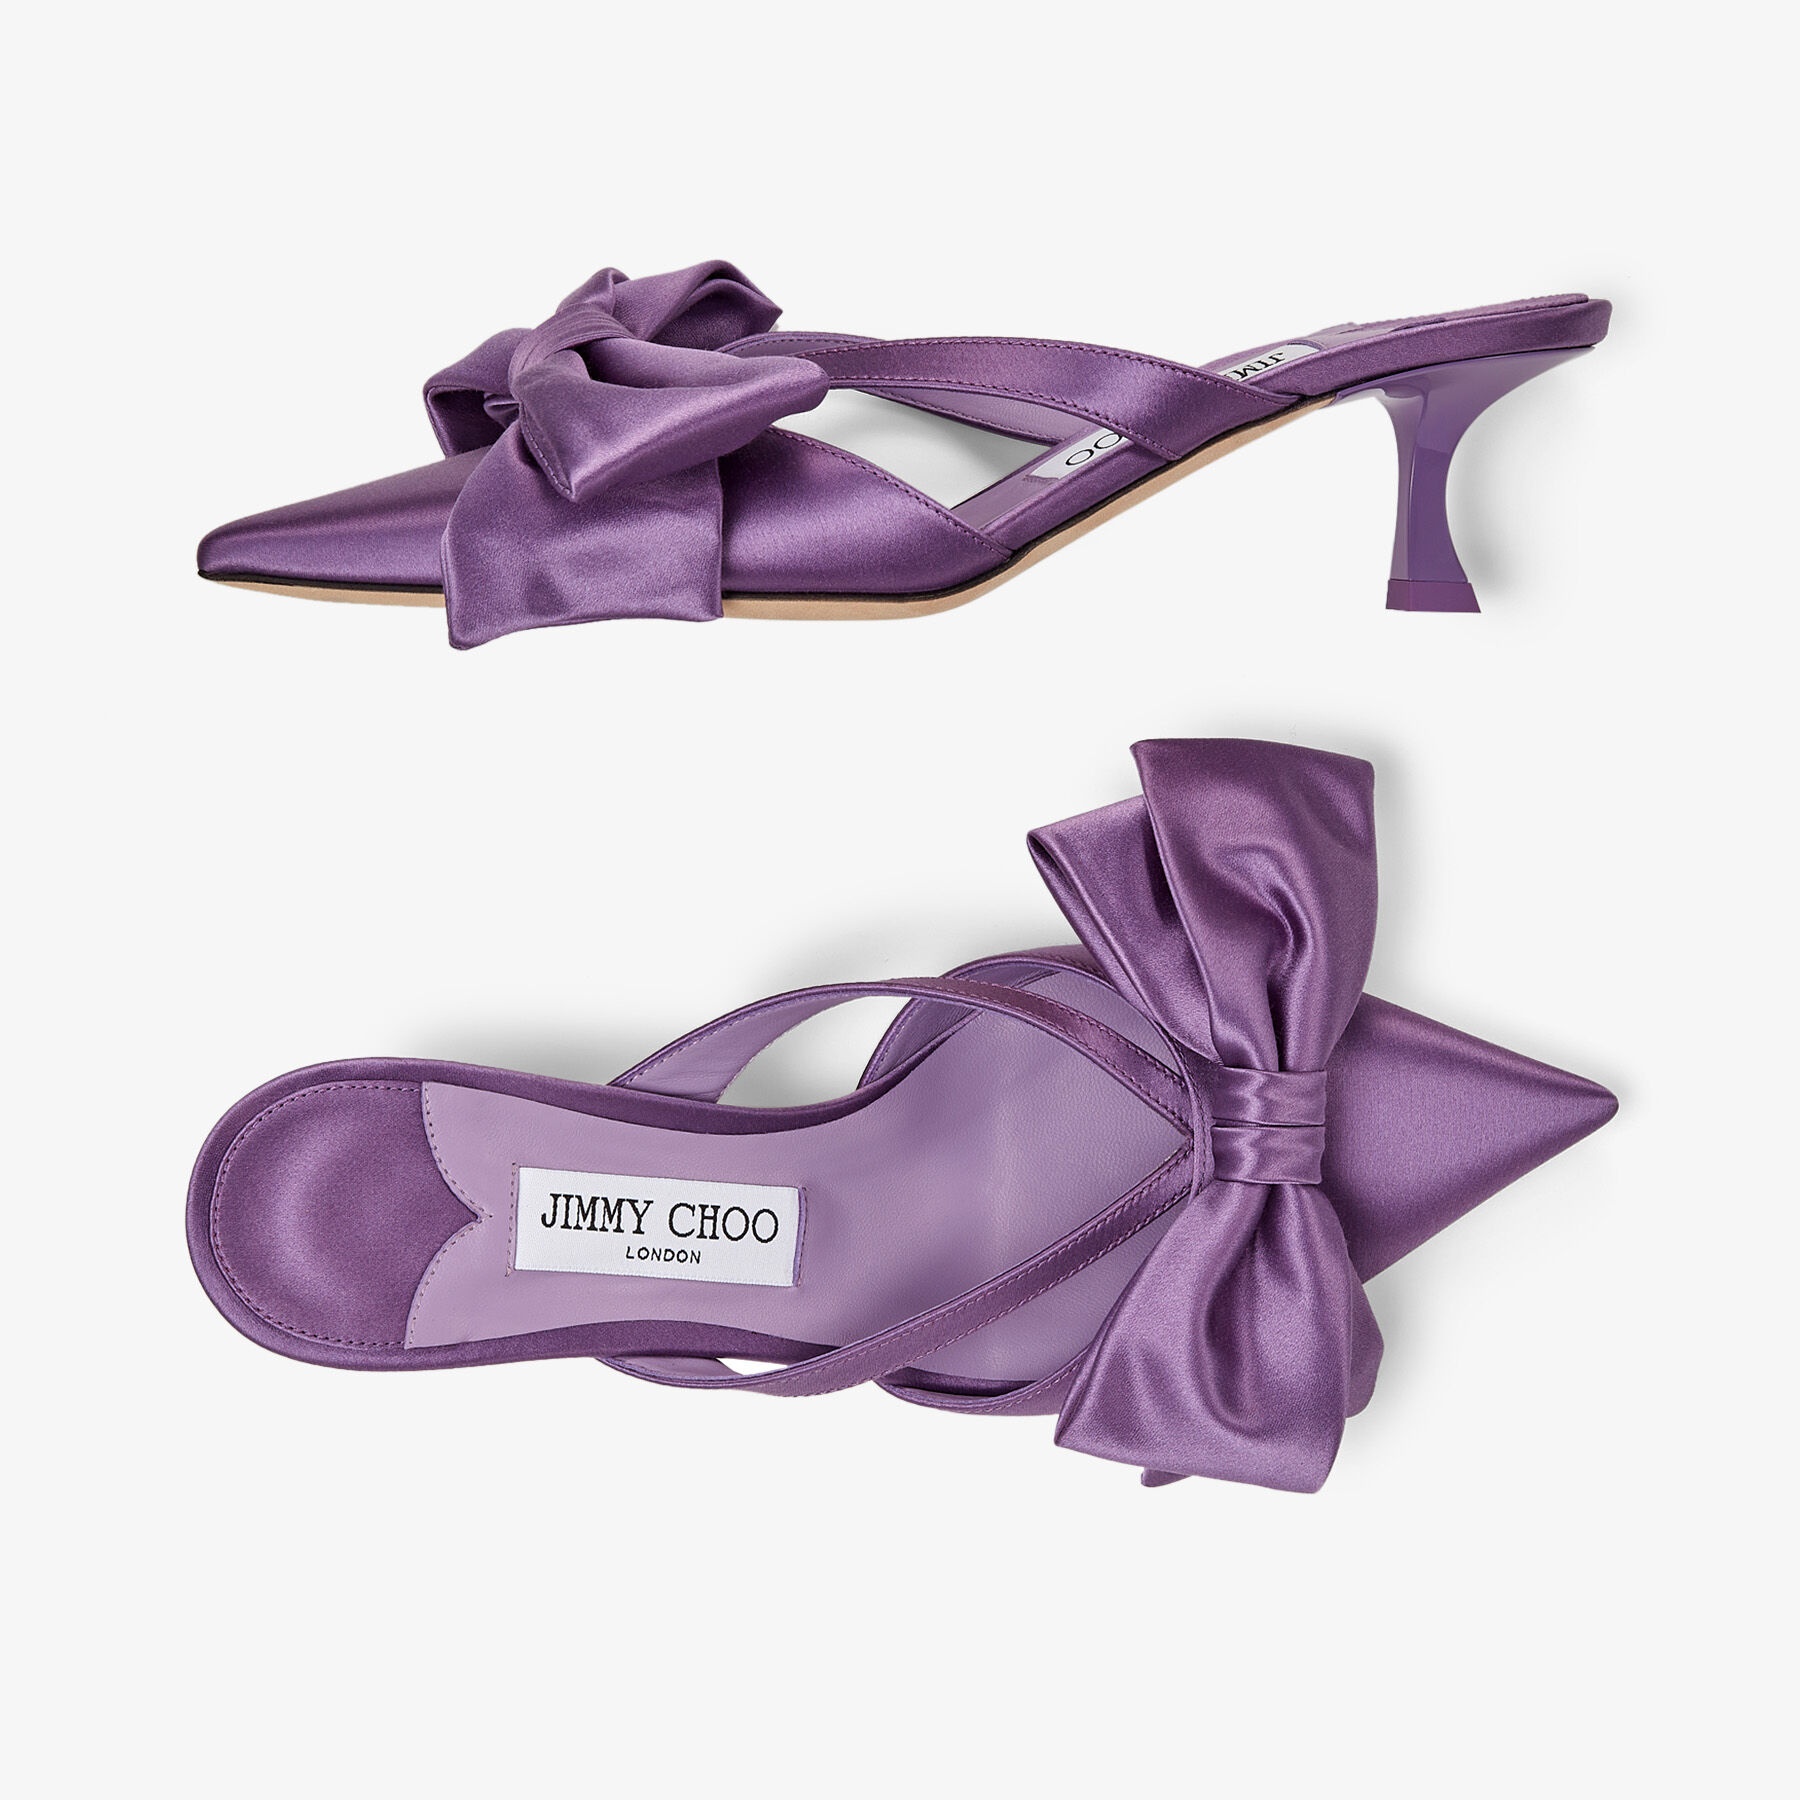 JIMMY CHOO Flaca Mule 50 Wisteria Satin Mules with Bow | REVERSIBLE